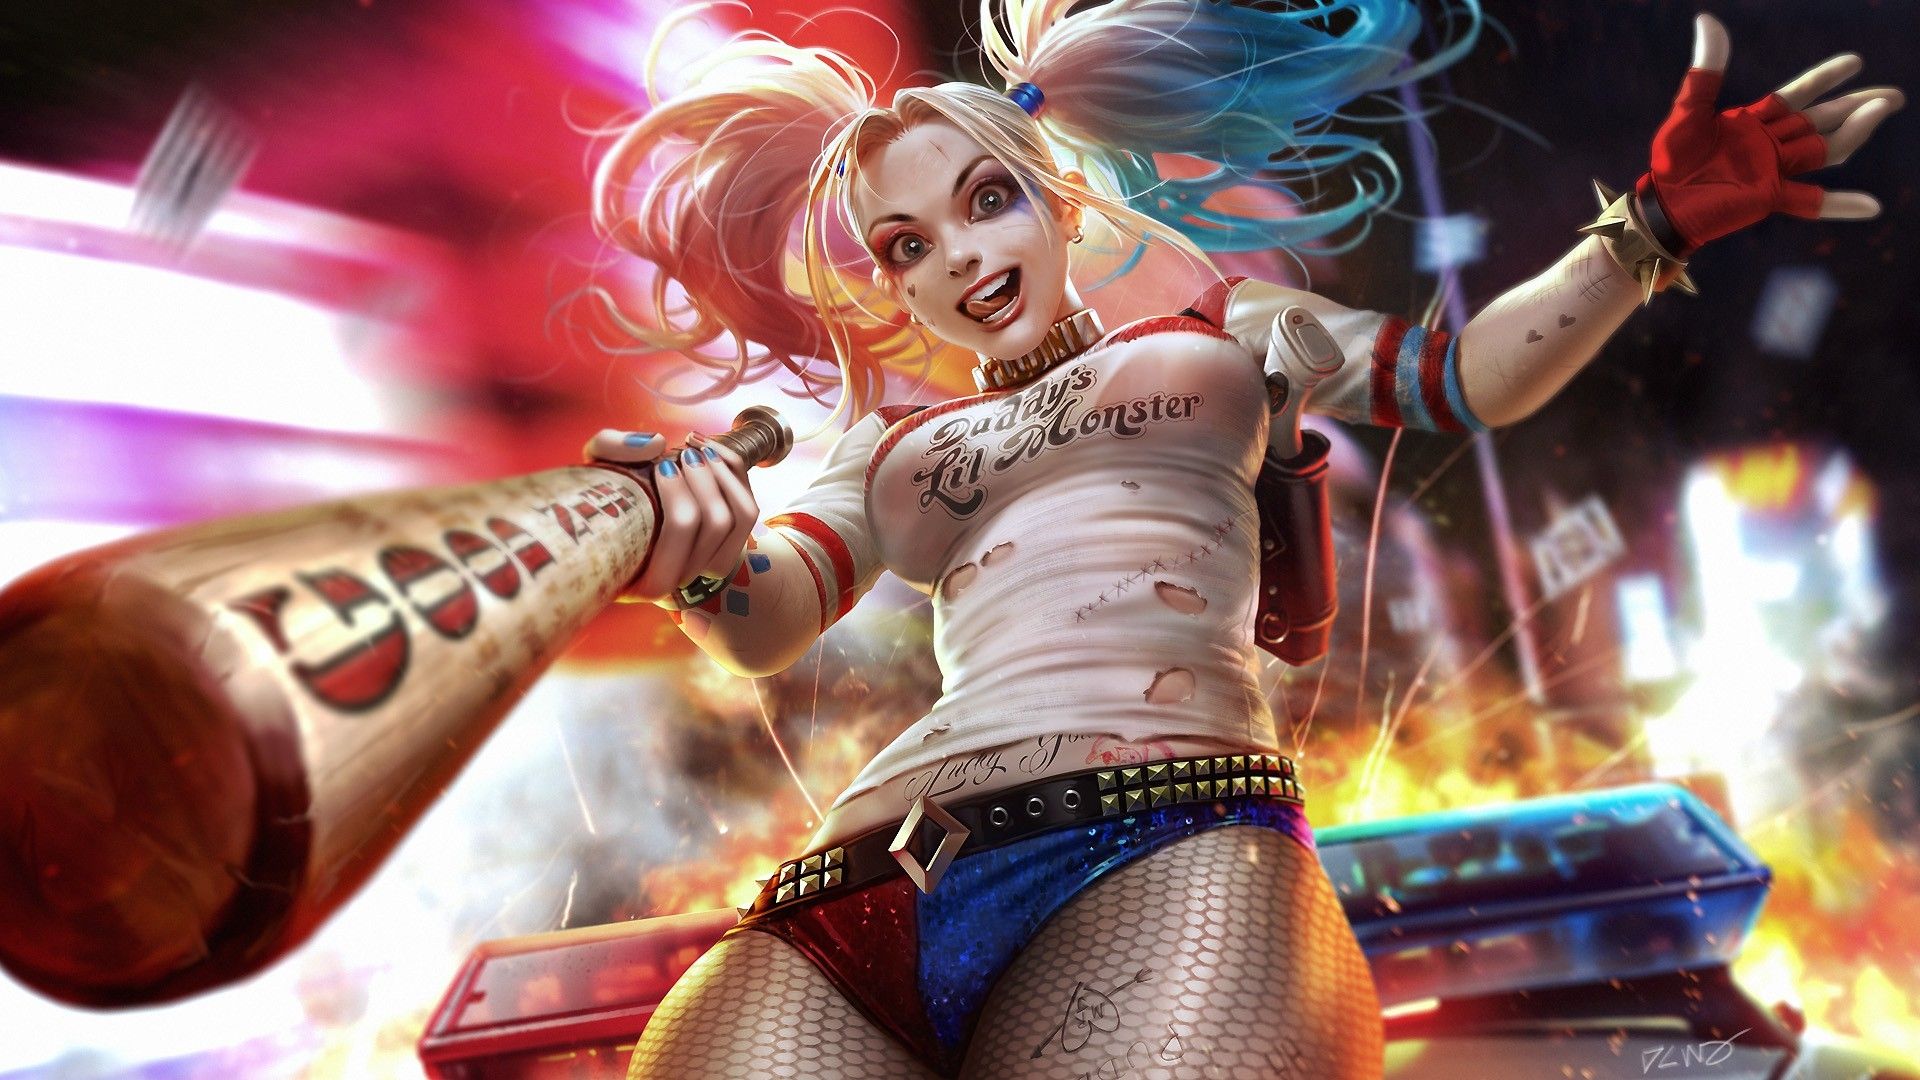 Painting Harley Quinn. Explore collection